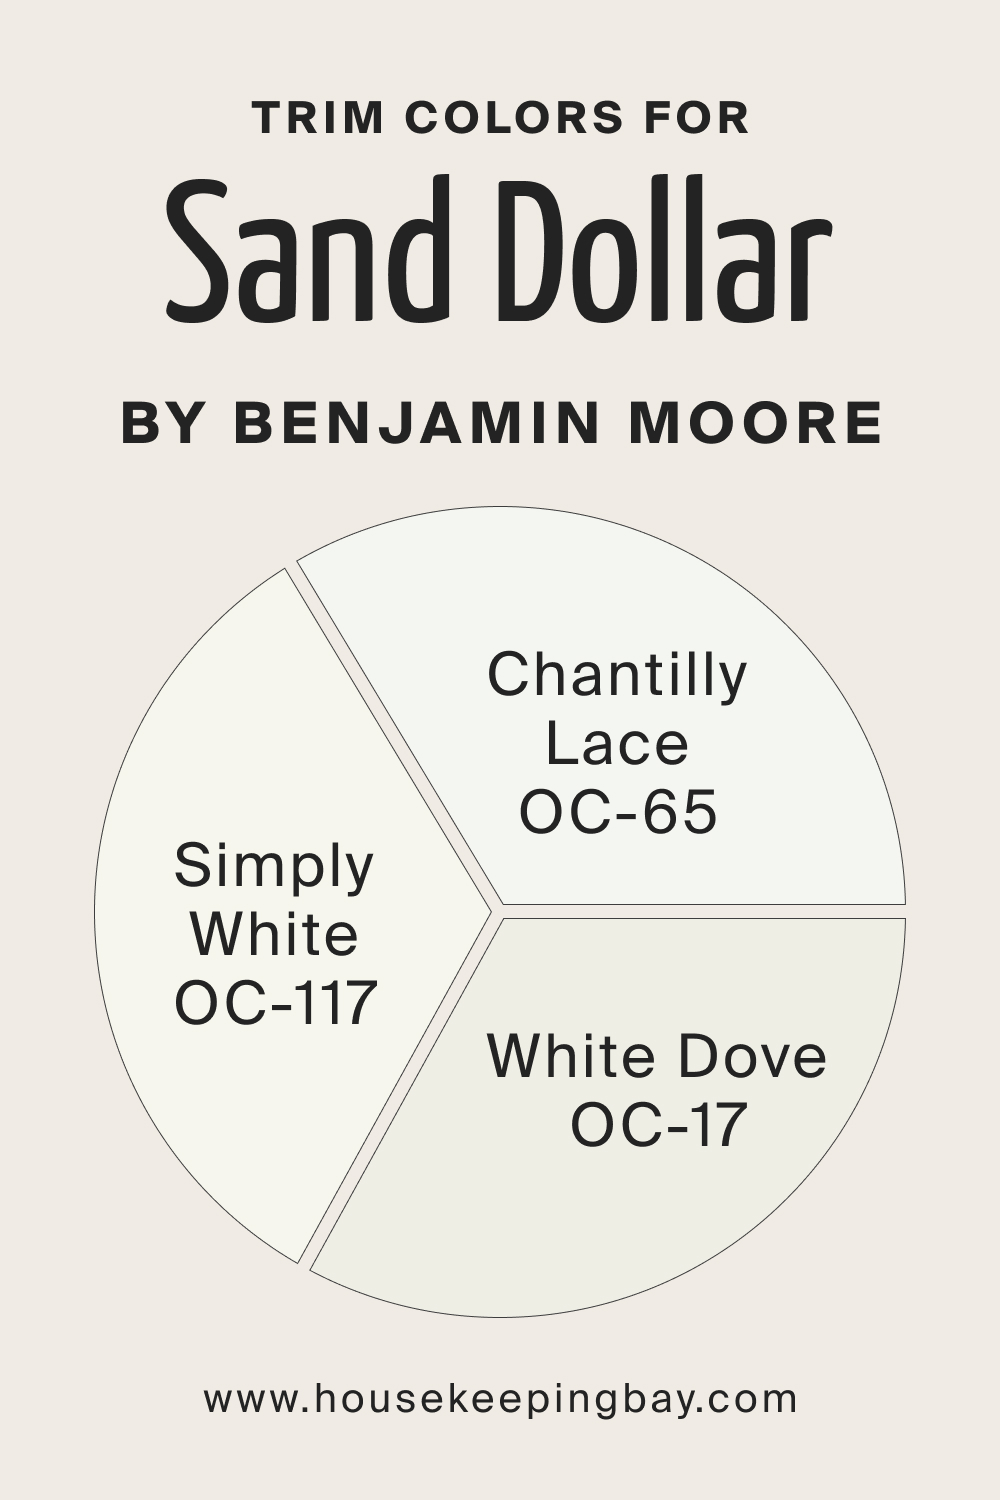 Trim Colors for Sand Dollar OC 71 by Benjamin Moore